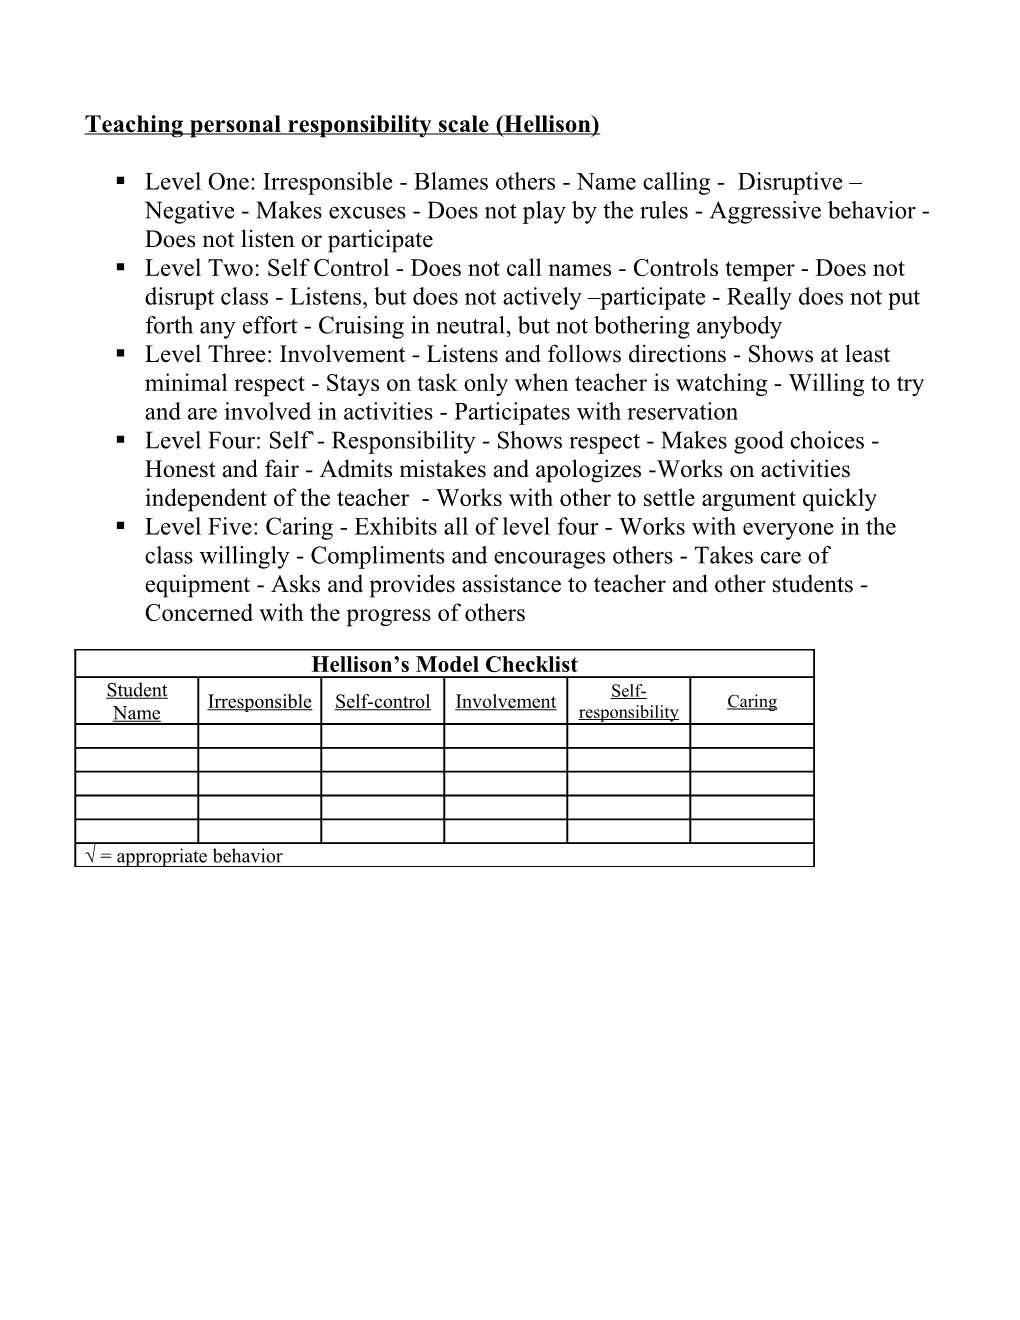 Teaching Personal Responsibility Scale (Hellison)